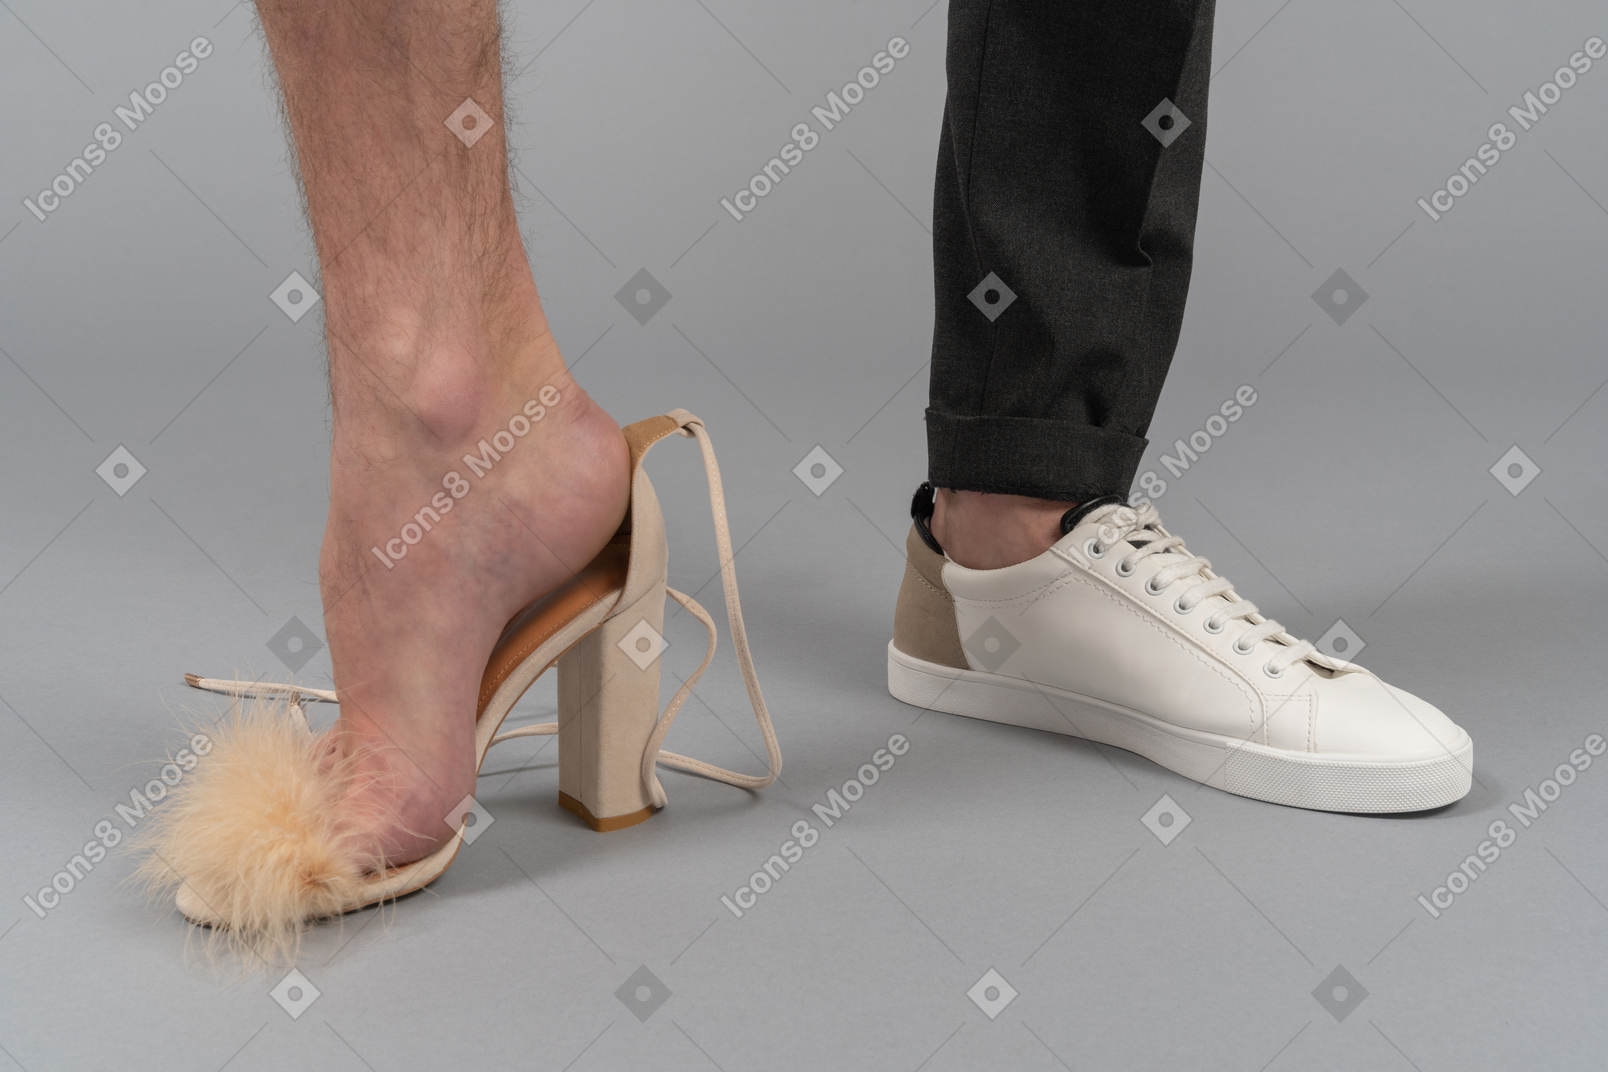 Man wearing heels and sneakers in the same time